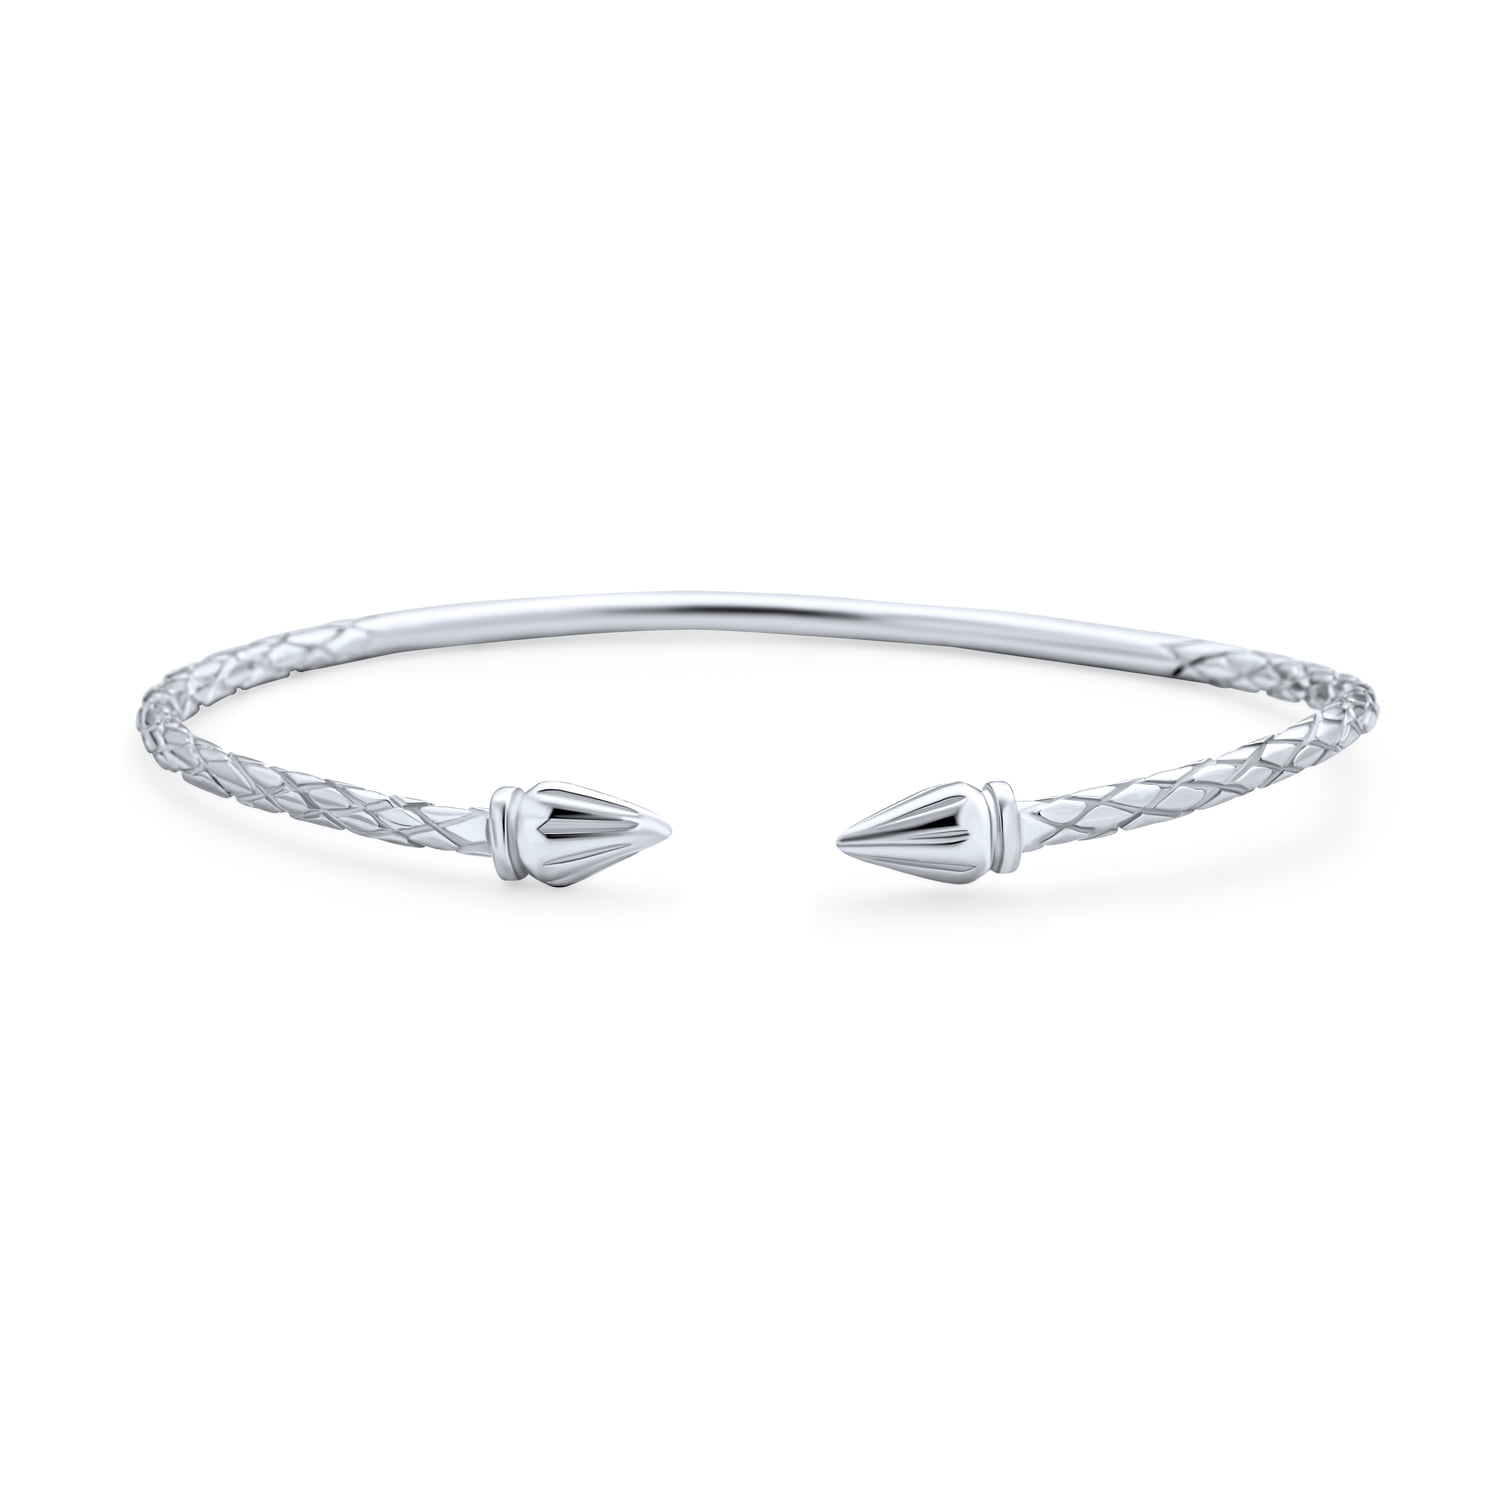 PAIR Solid .925 Sterling Silver West Indian Bangles with Fancy Pointed Ends 